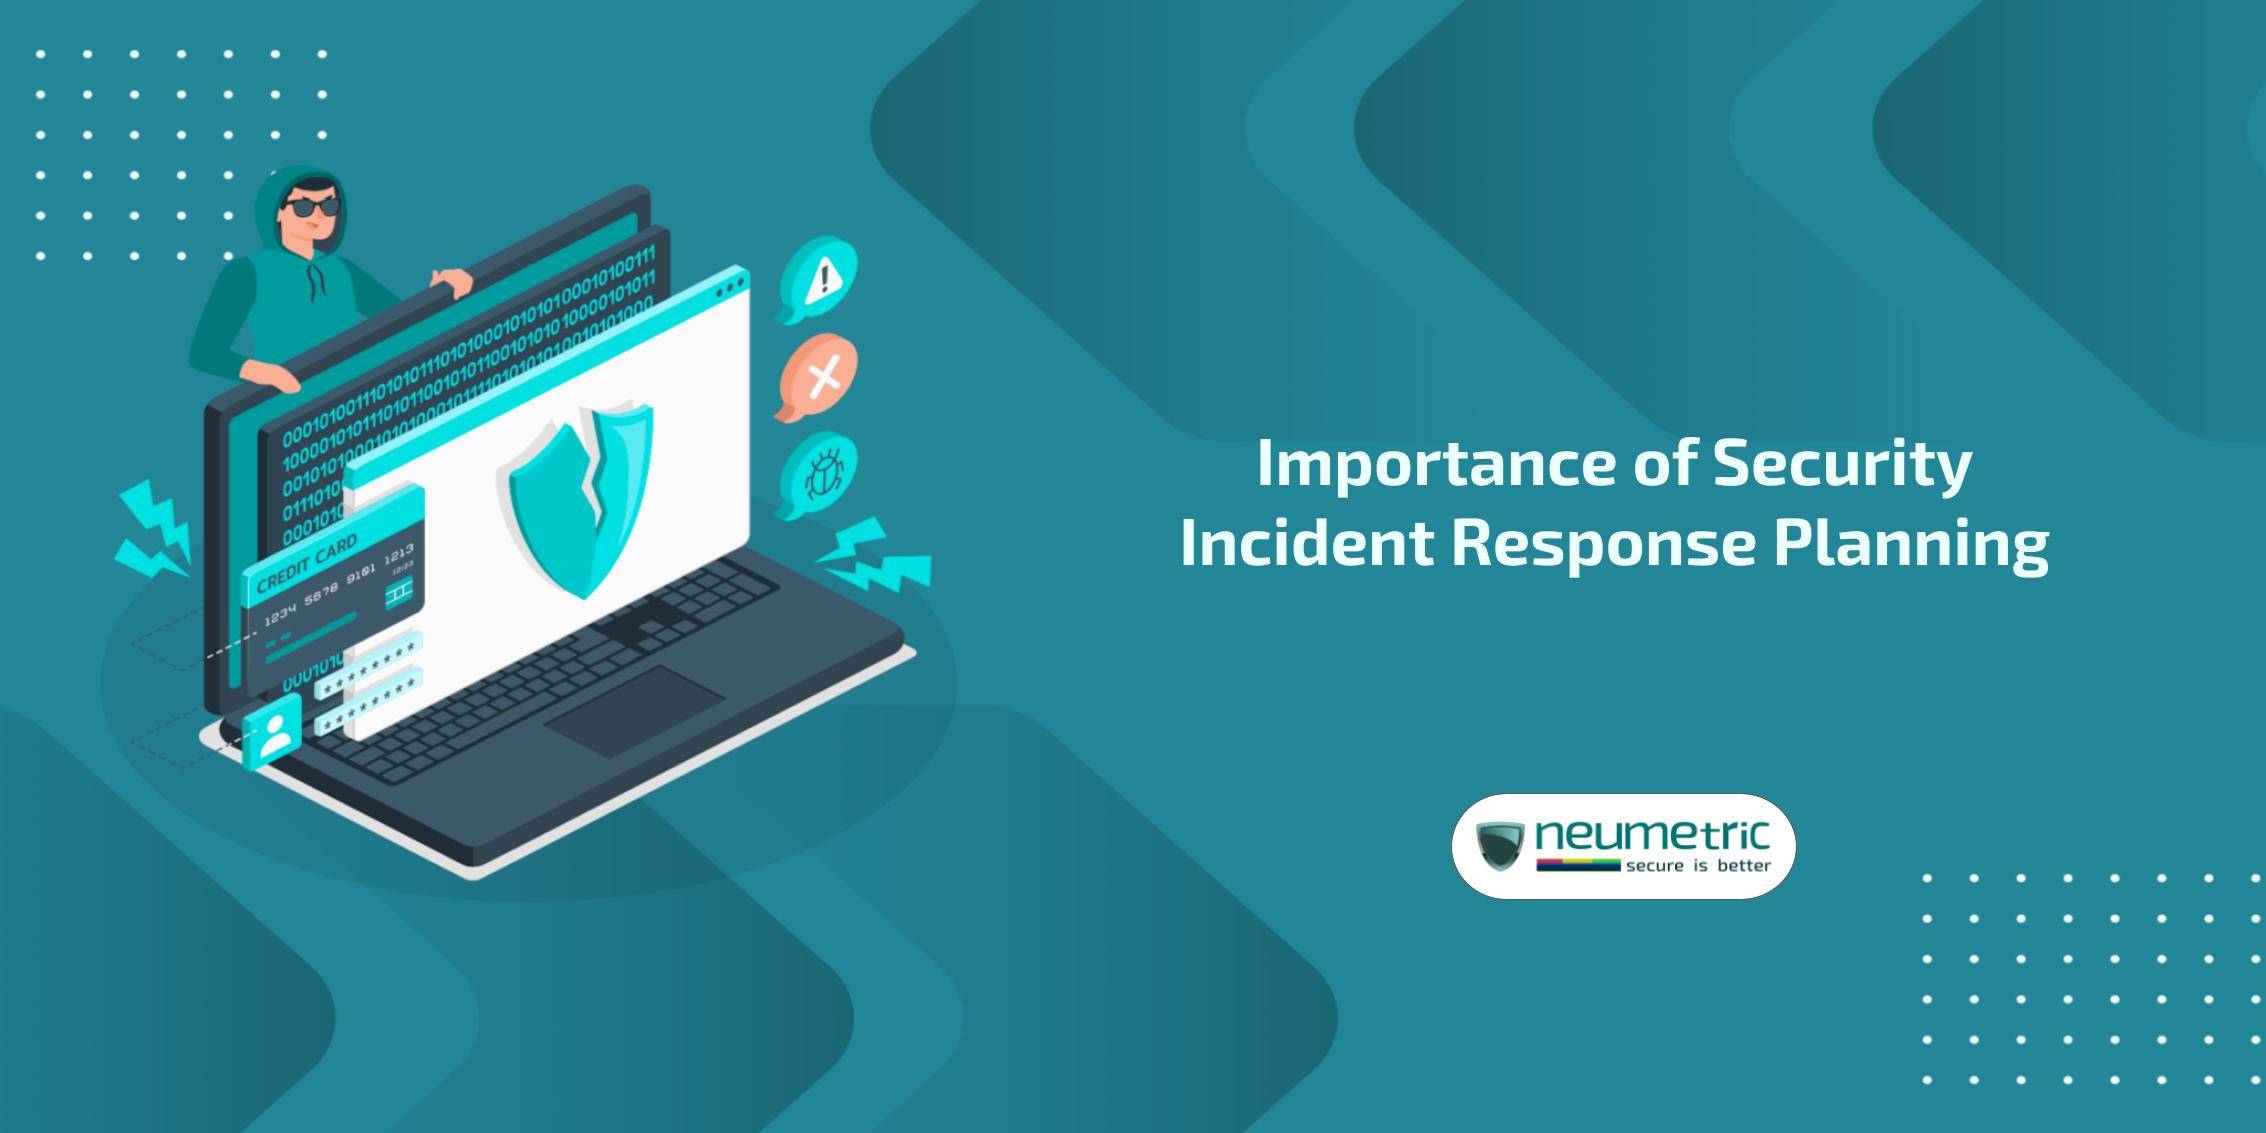 Security incident response planning